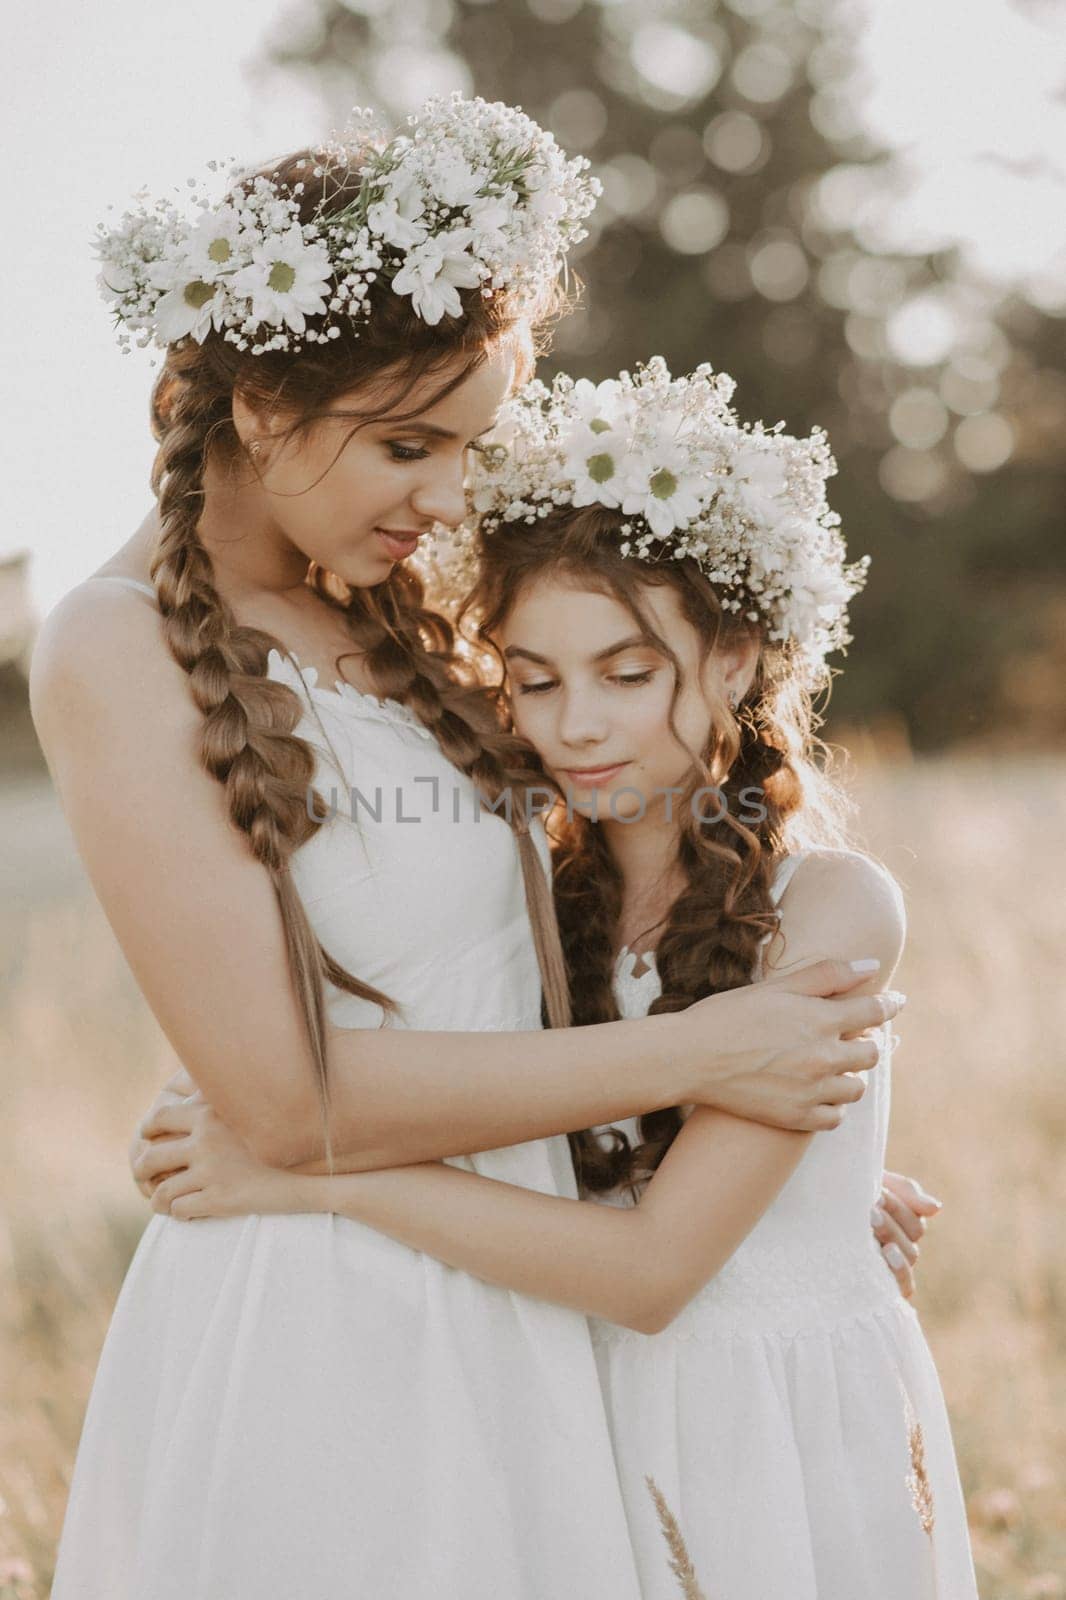 happy sisters in white dresses with floral wreaths and boho style braids in summer in a field in nature. Added a small grain simulation of film photography